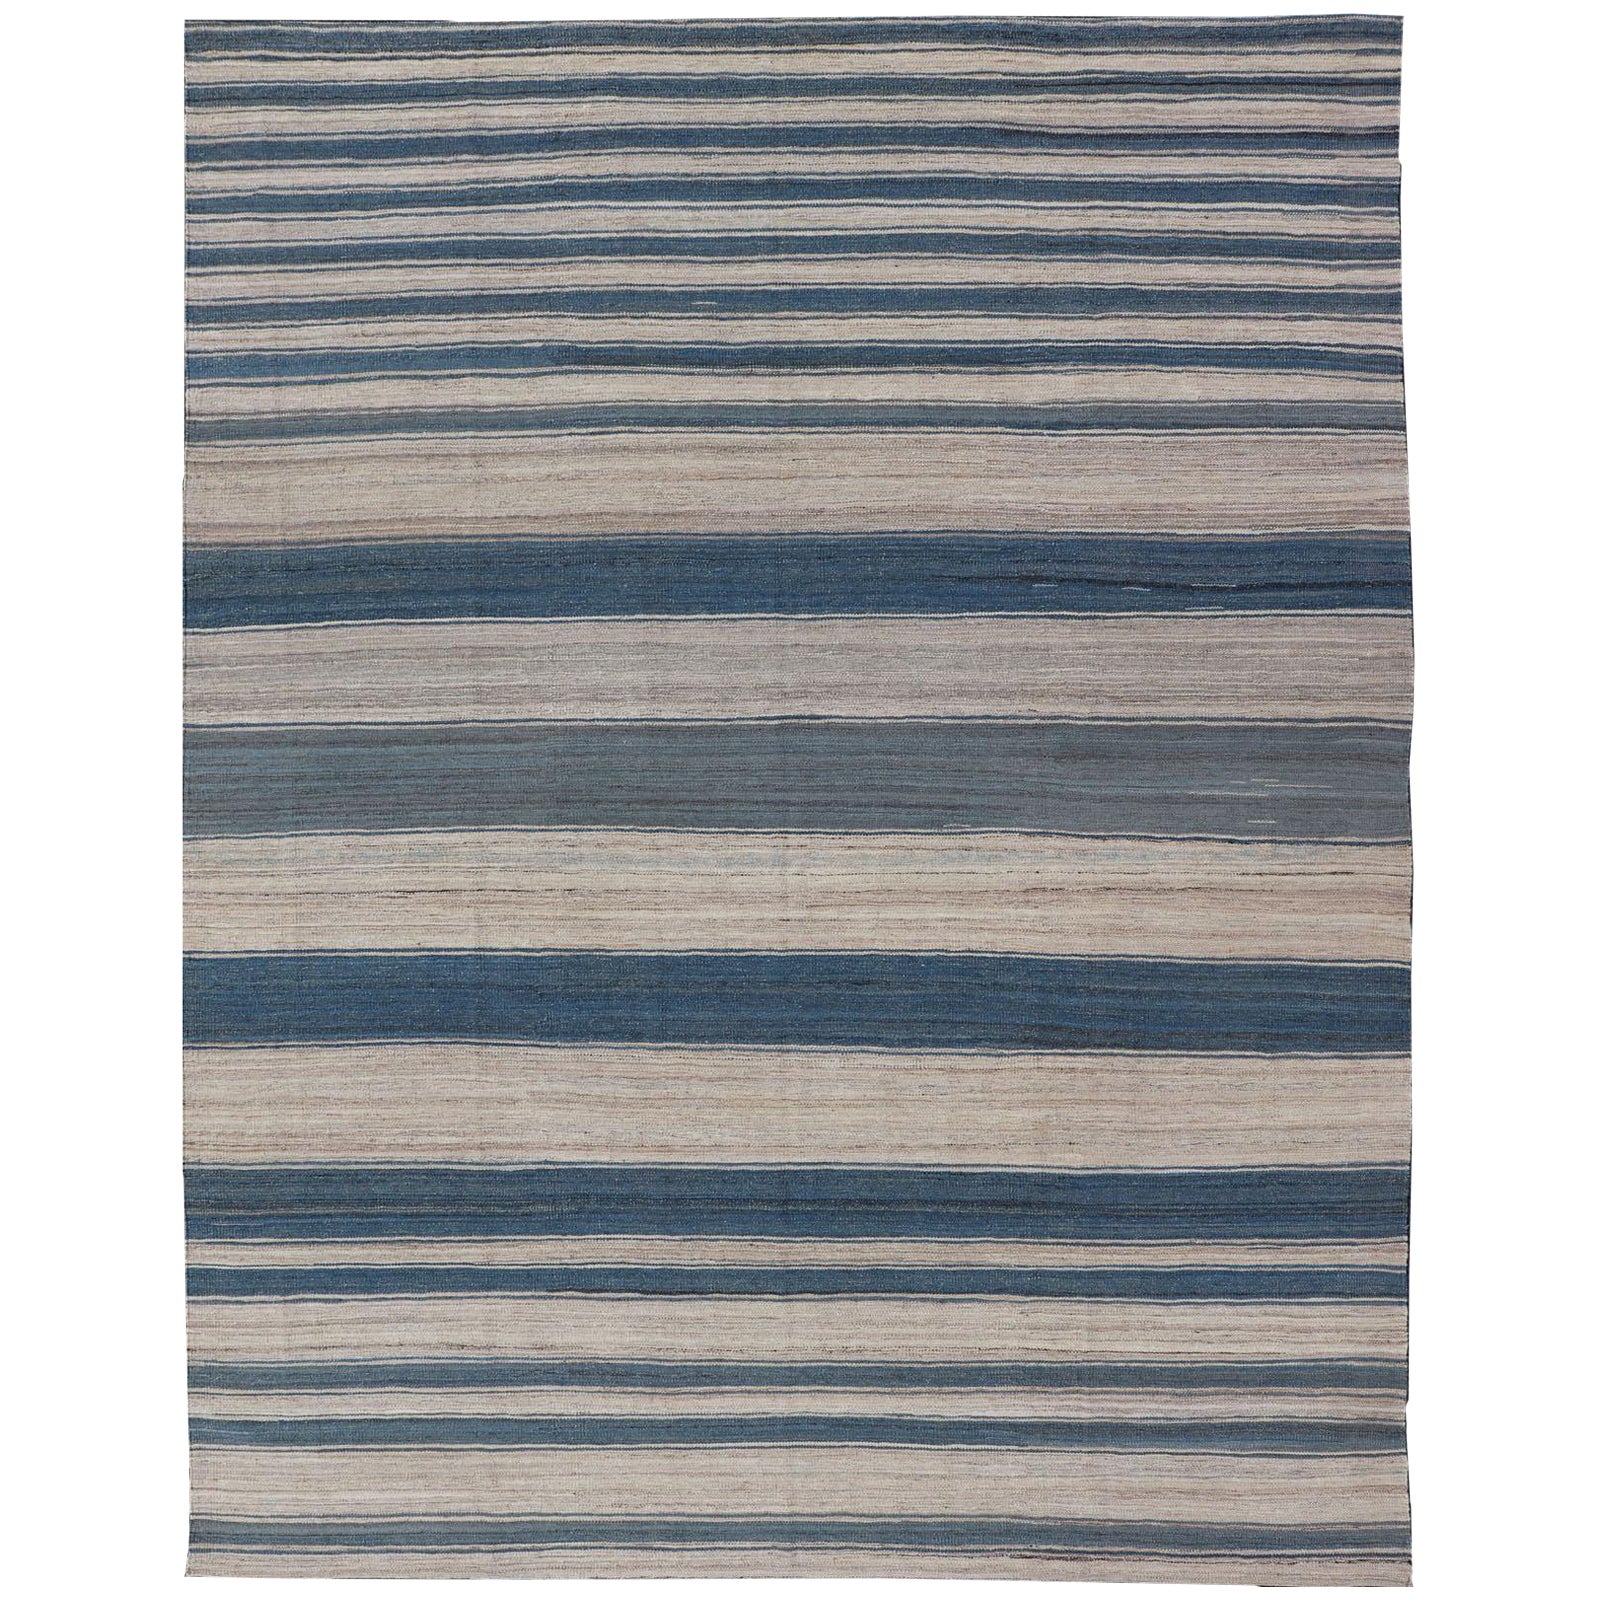 Flat-Weave Modern Kilim Rug with Stripes in Shades of Blue, and Cream